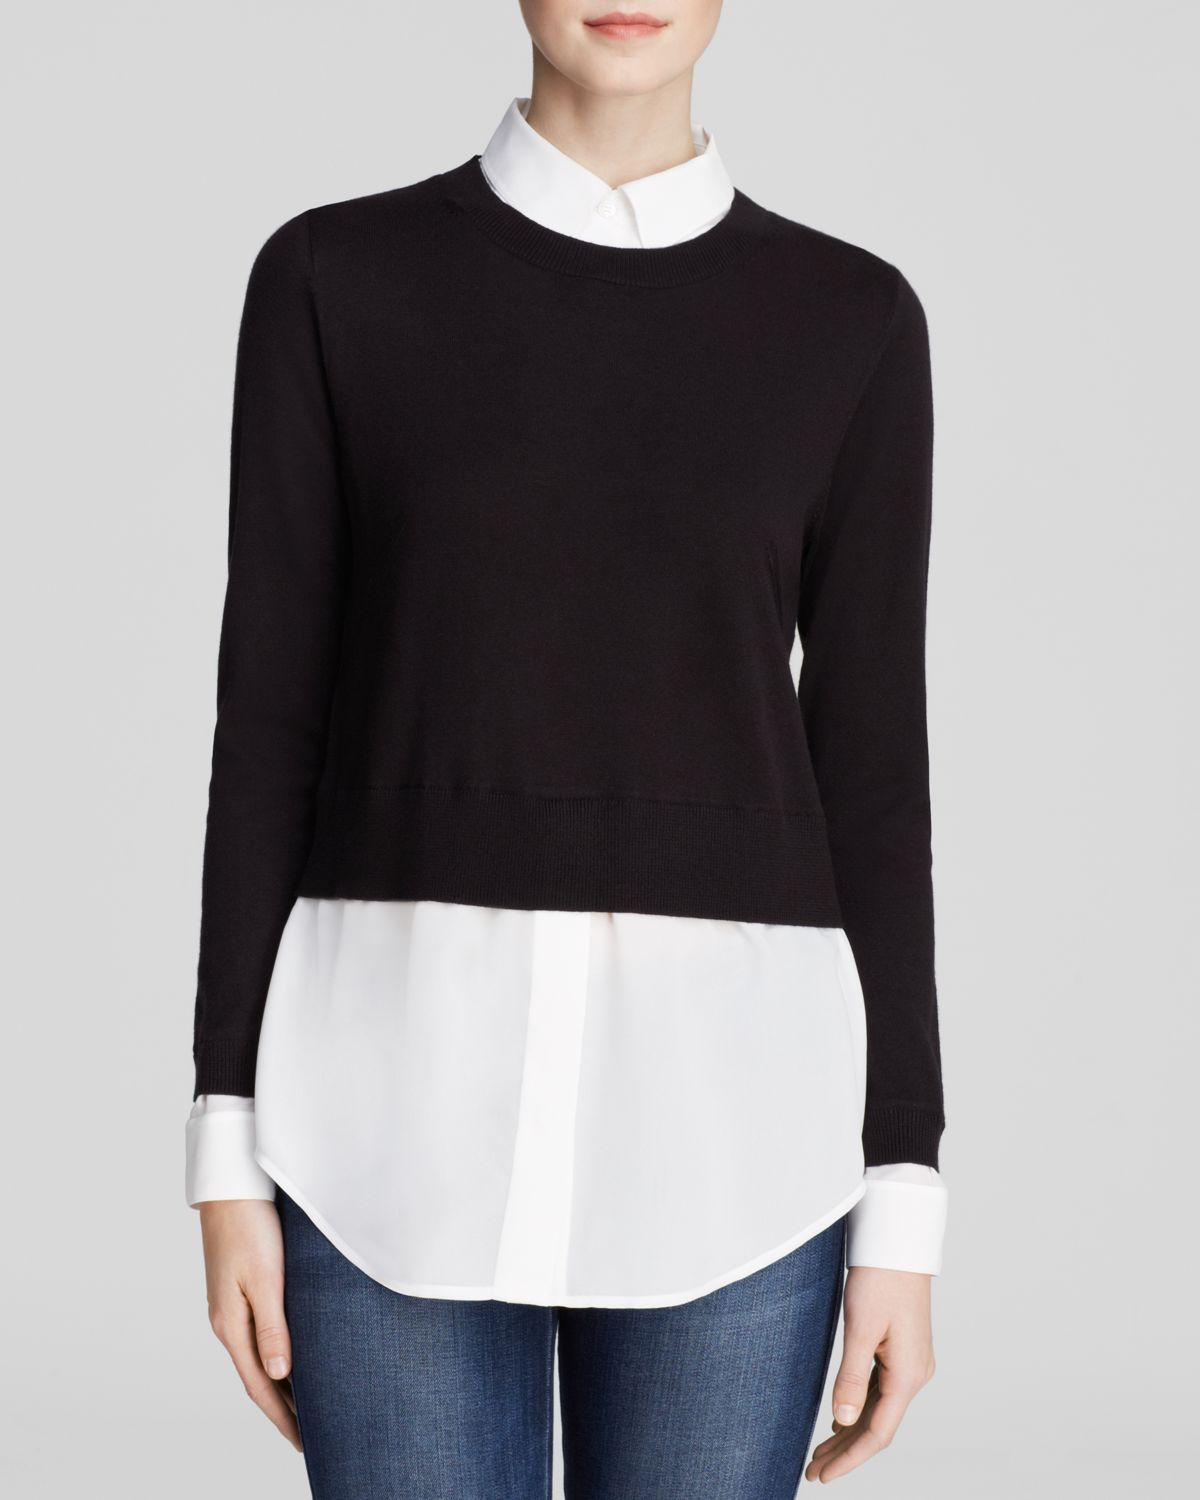 Dylan Gray Sweater Shirt Combo in Black - Lyst